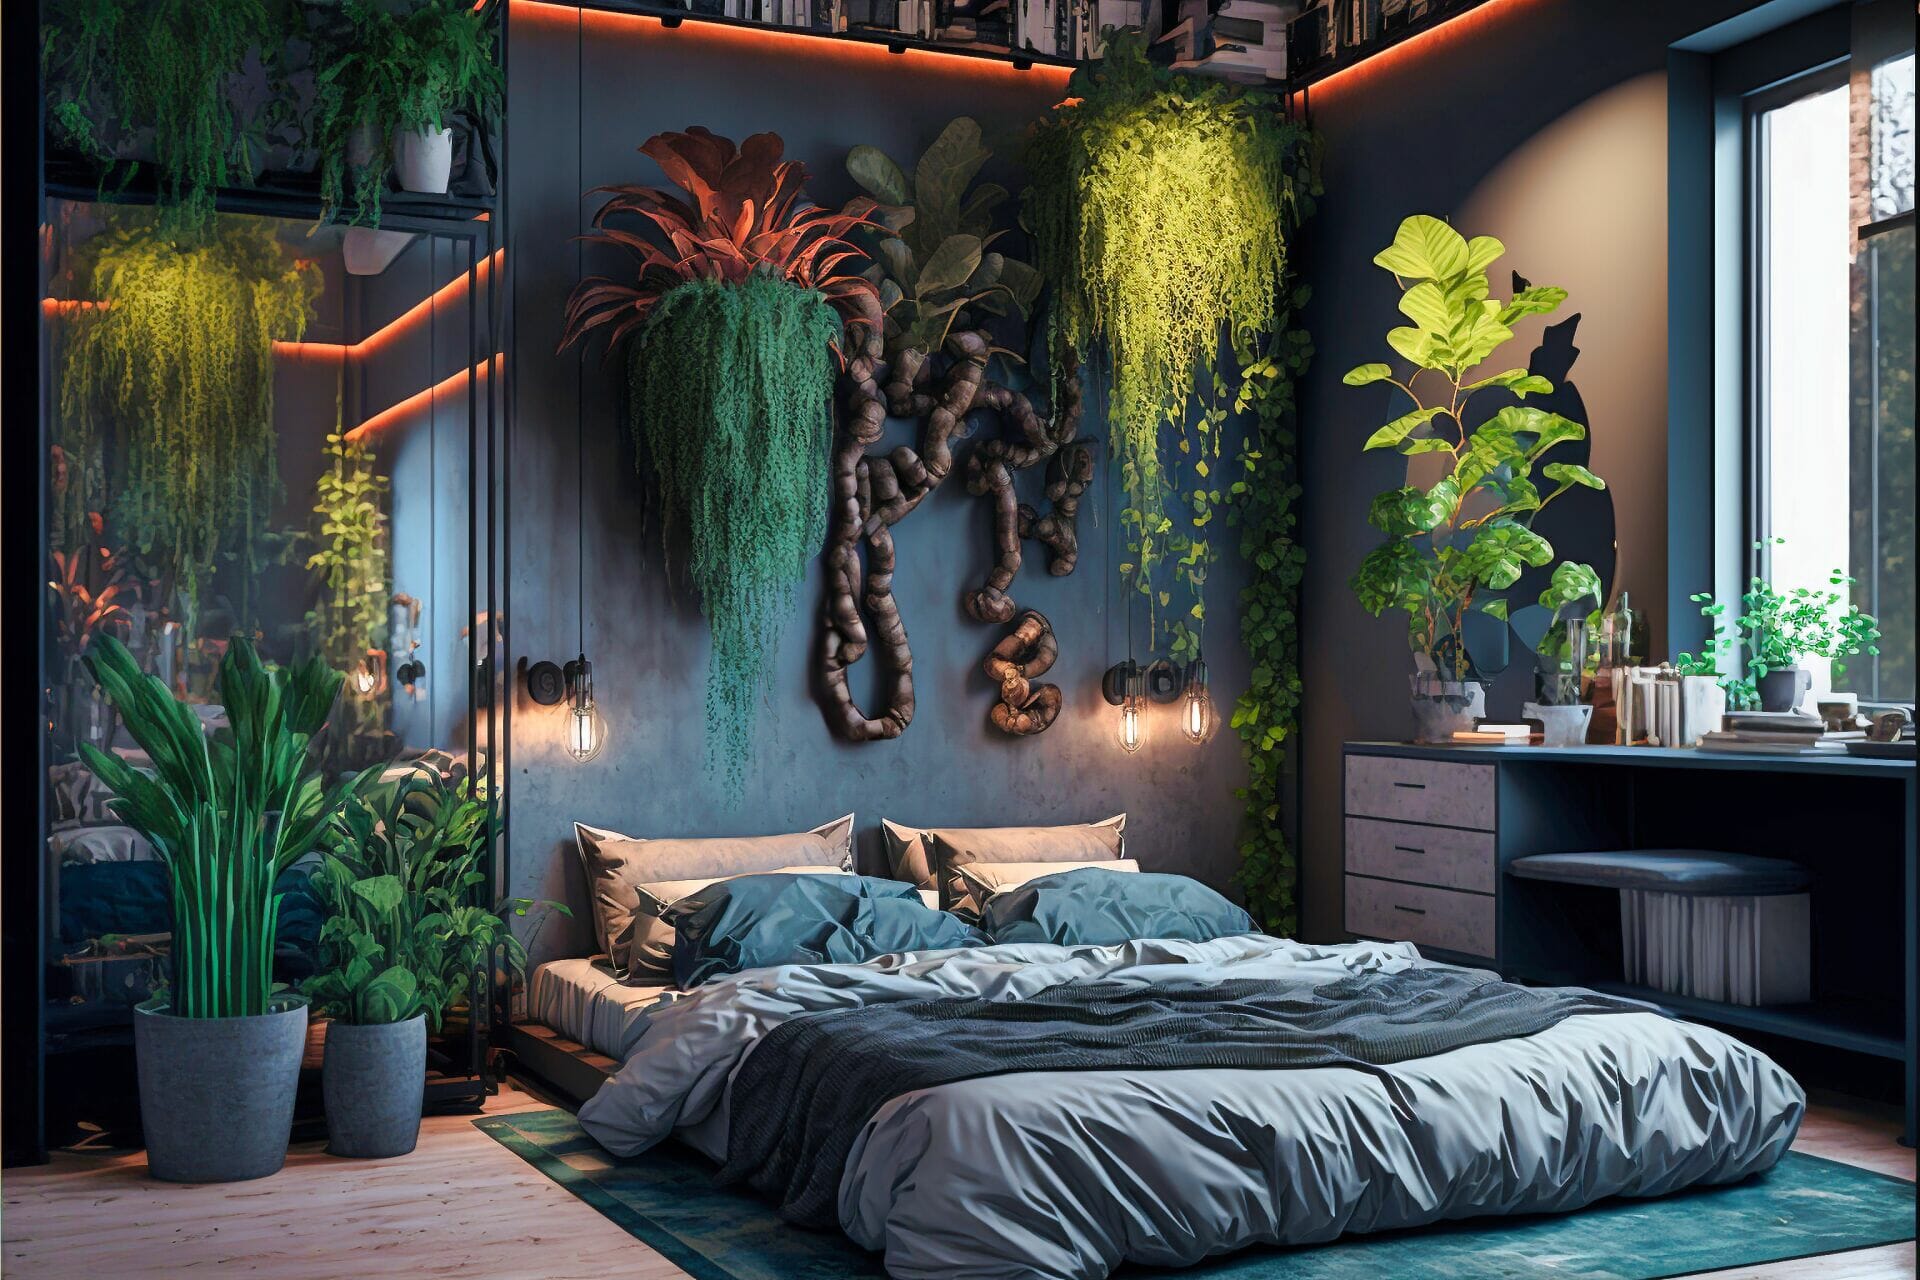 Cyberpunk Style Bedroom With A Unique Industrial Urban Style. The Walls Are Painted A Deep Charcoal Gray, With Metallic Accents And Plants Growing From The Wall. The Center Of The Room Features A Large, Dark Brown Bed, With A Matching Bed Frame And Nightstands. The Lighting Is Low And Ambient, With A Light Strip Running Along The Walls, And A Hanging Bulb Providing The Main Lighting Source. The Floor Is A Dark Gray, Industrial Tile.